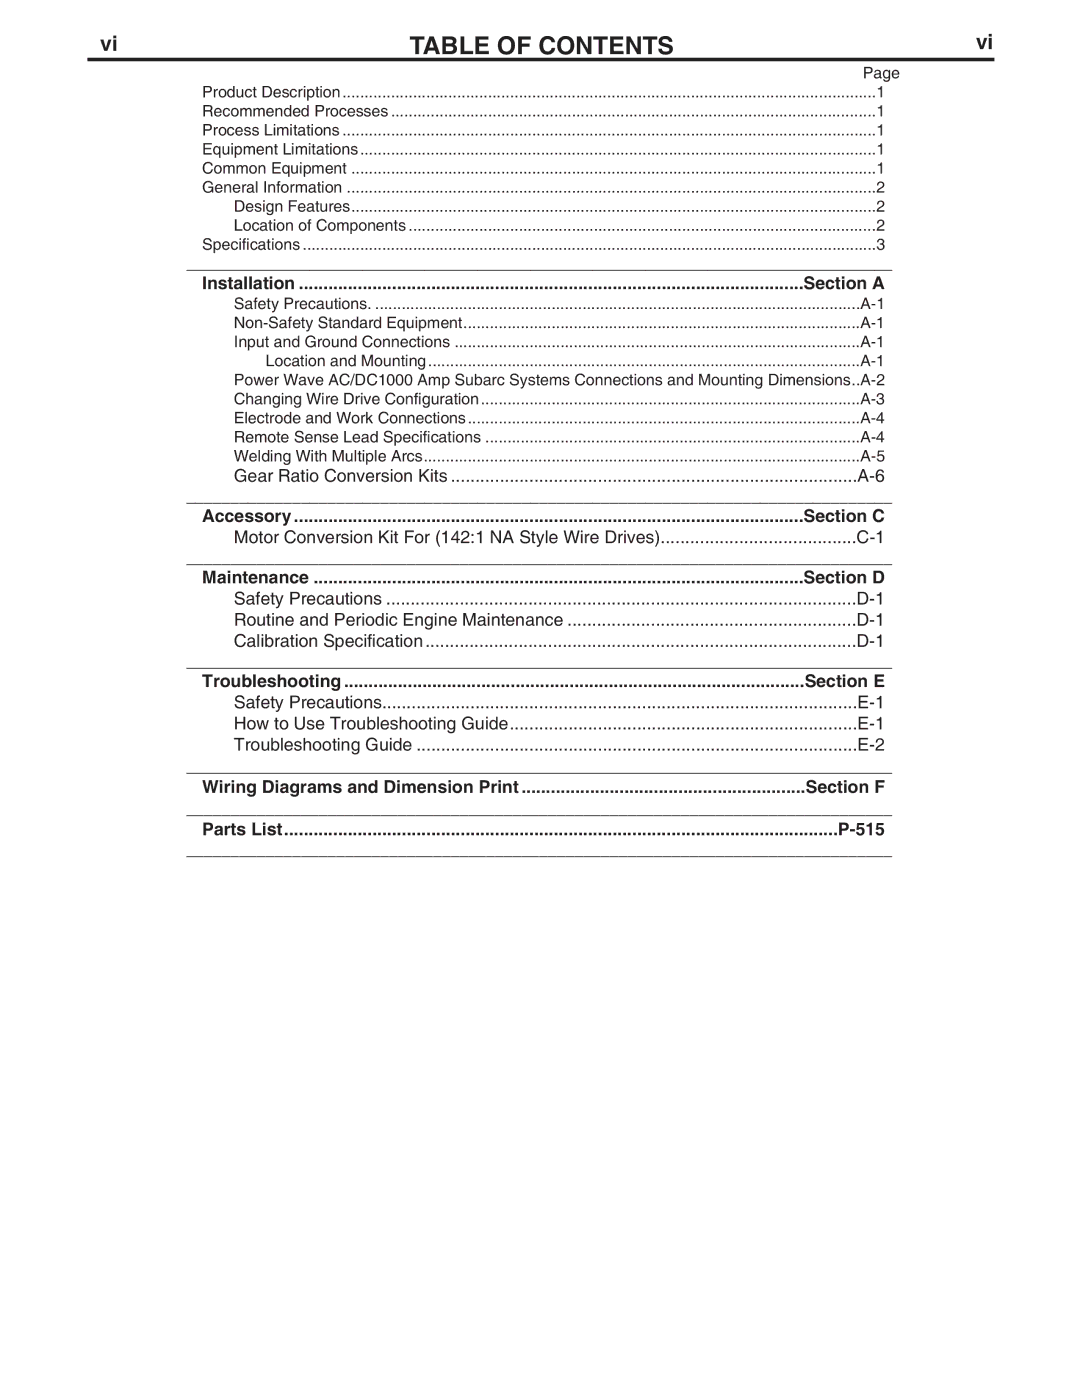 Lincoln Electric IM850-A manual Table of Contents 